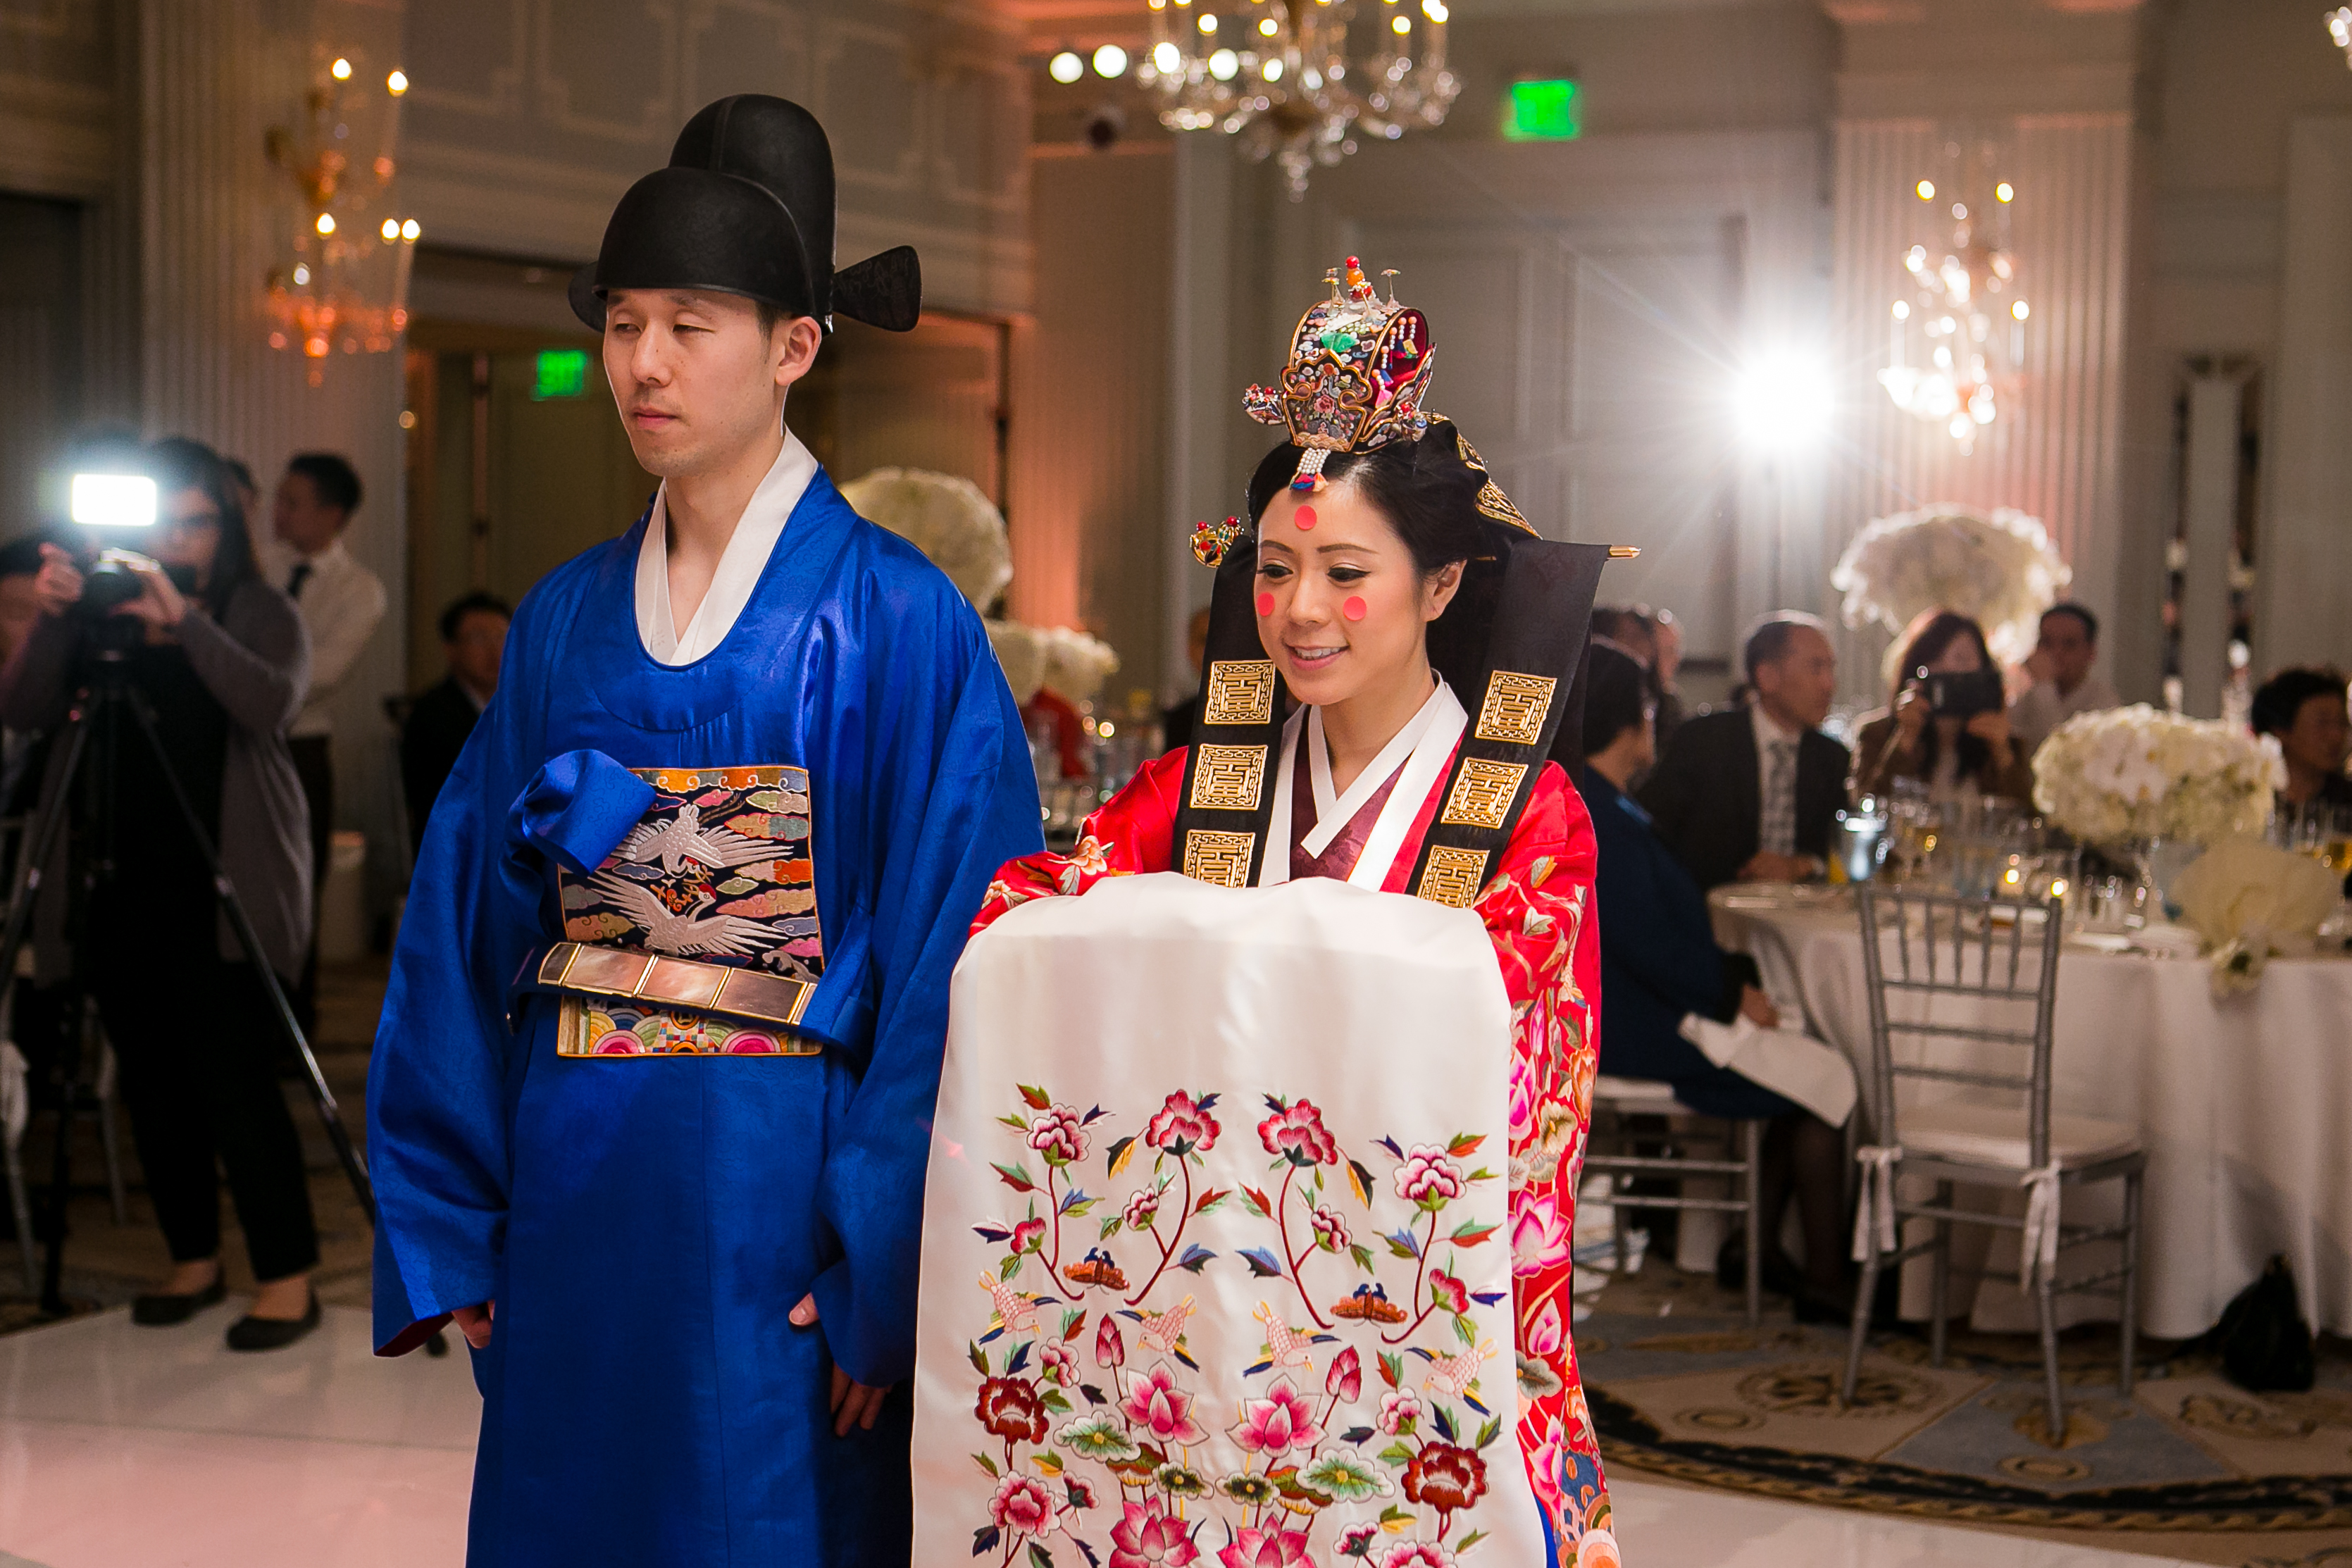 Korean Wedding Traditions | What You ...